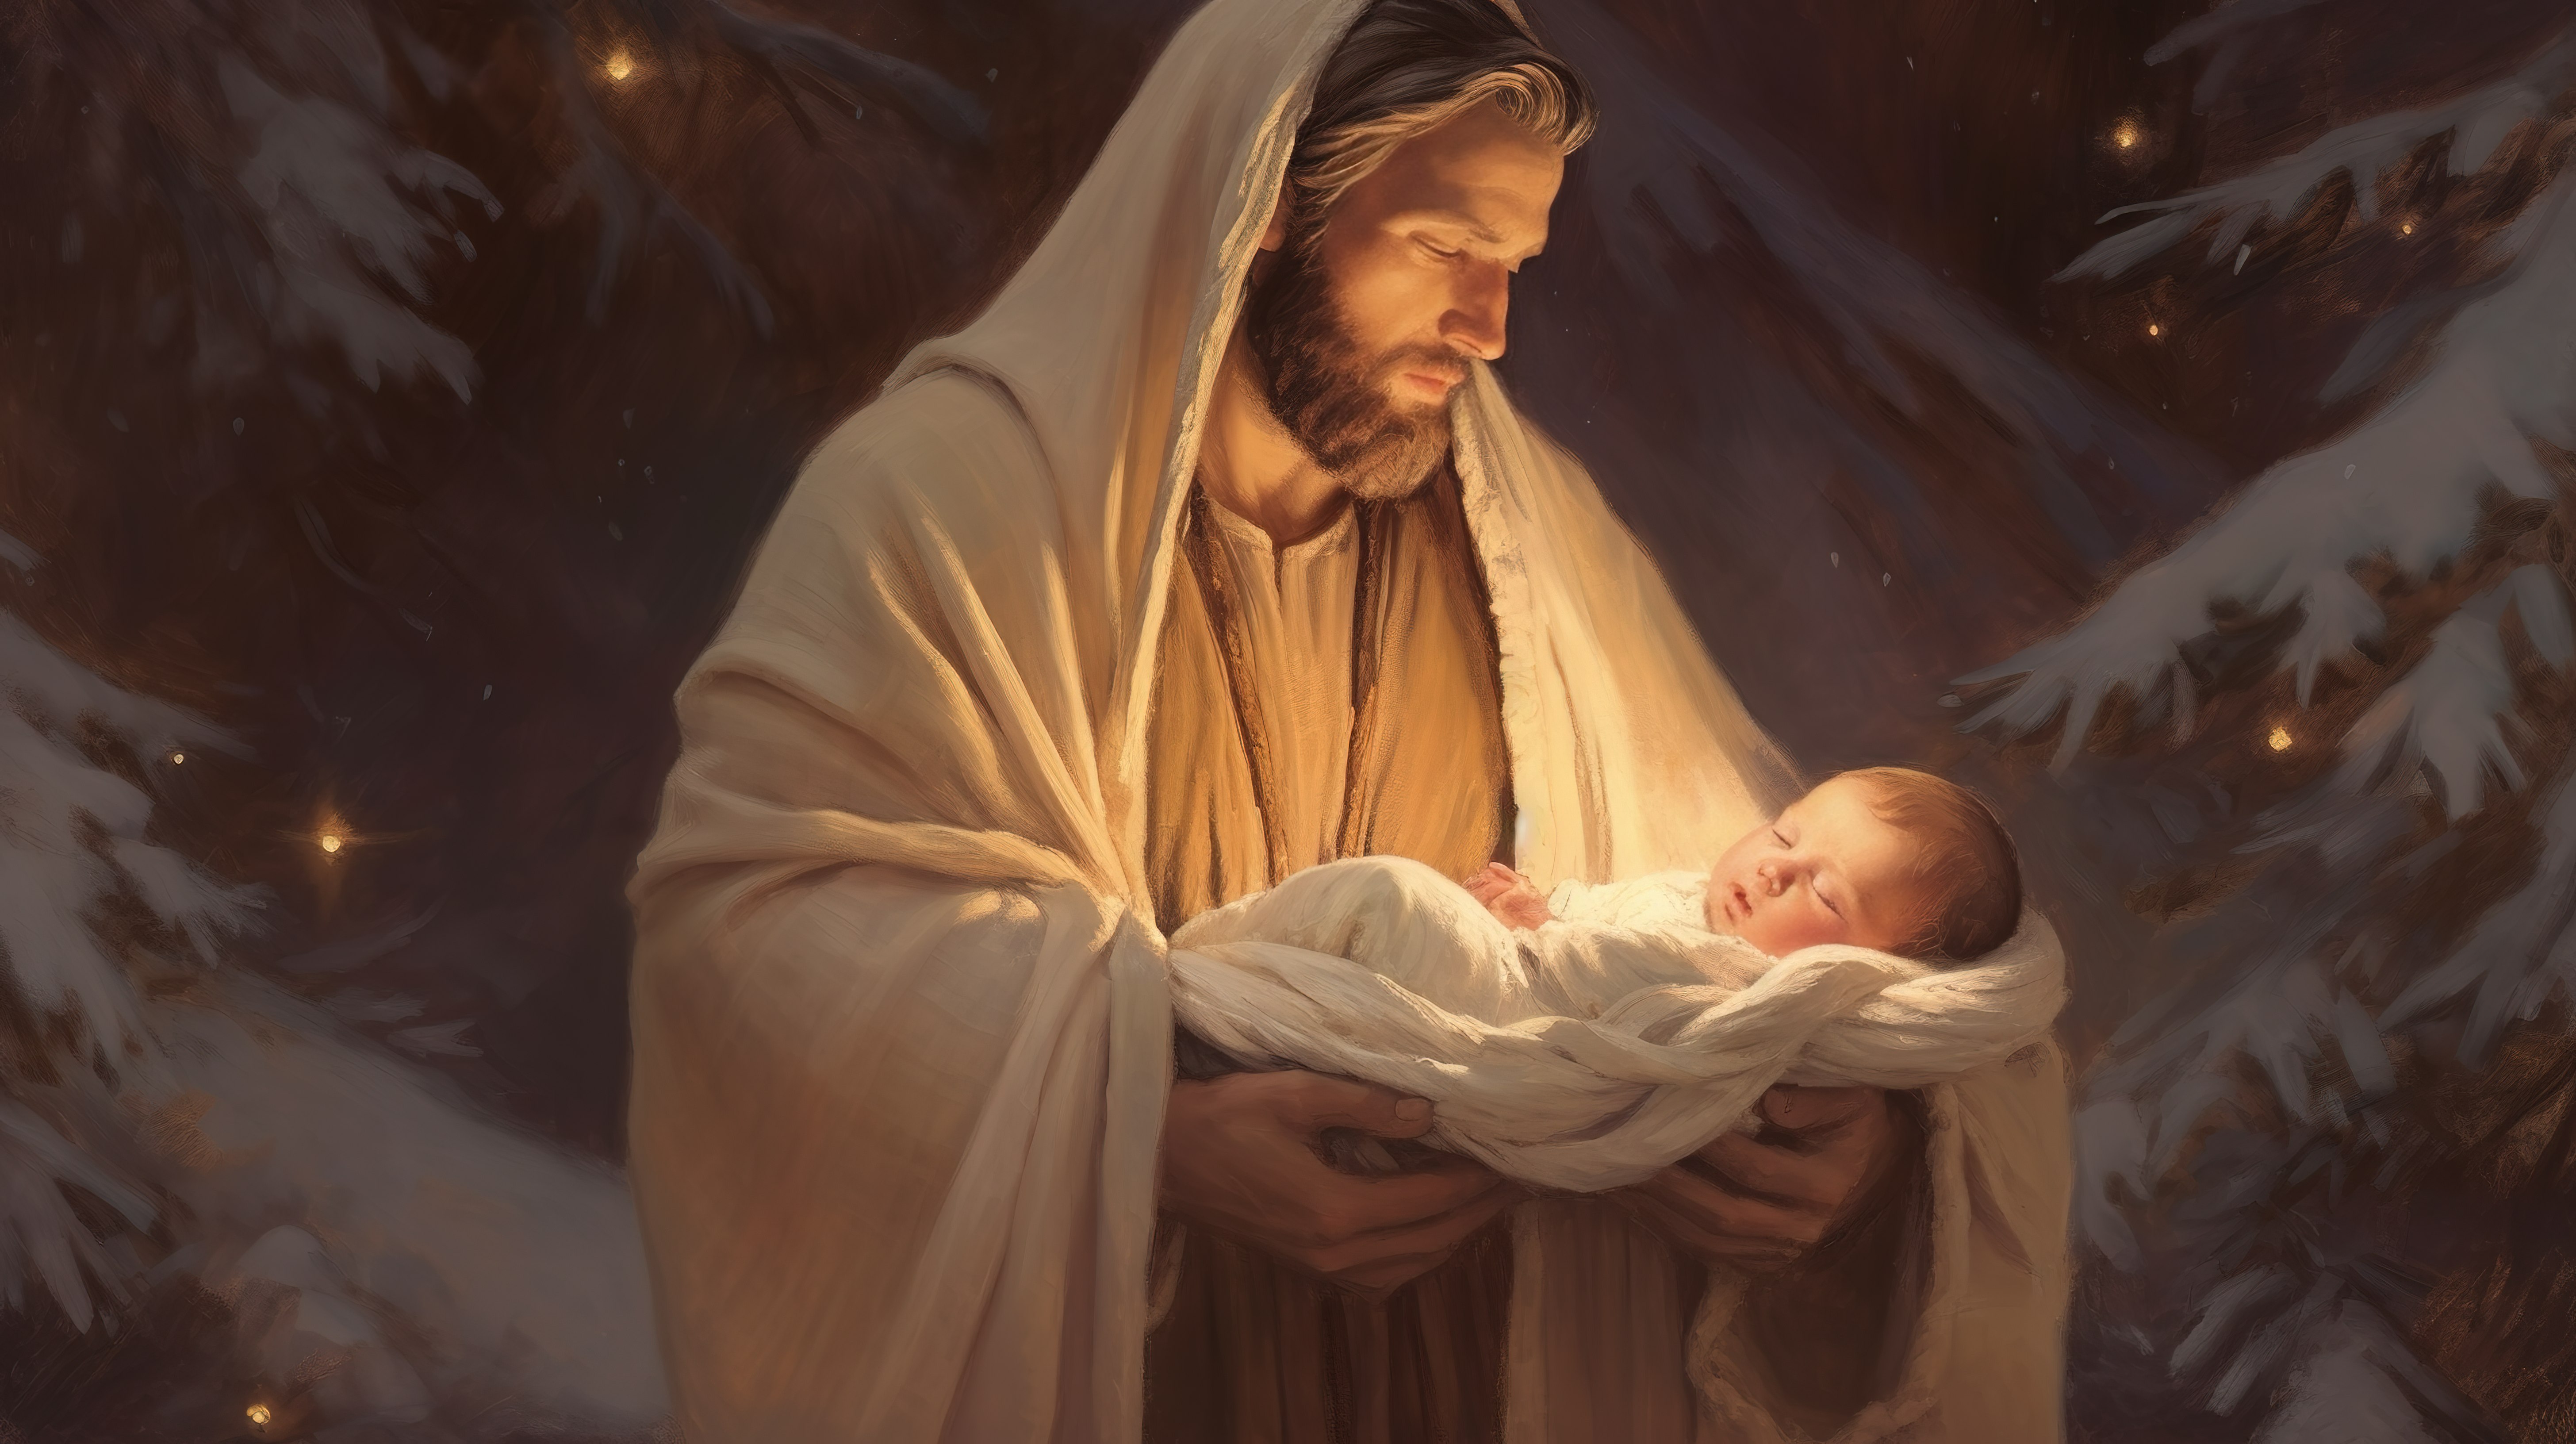 —Pngtree—jesus holding a baby in_2774958.jpg